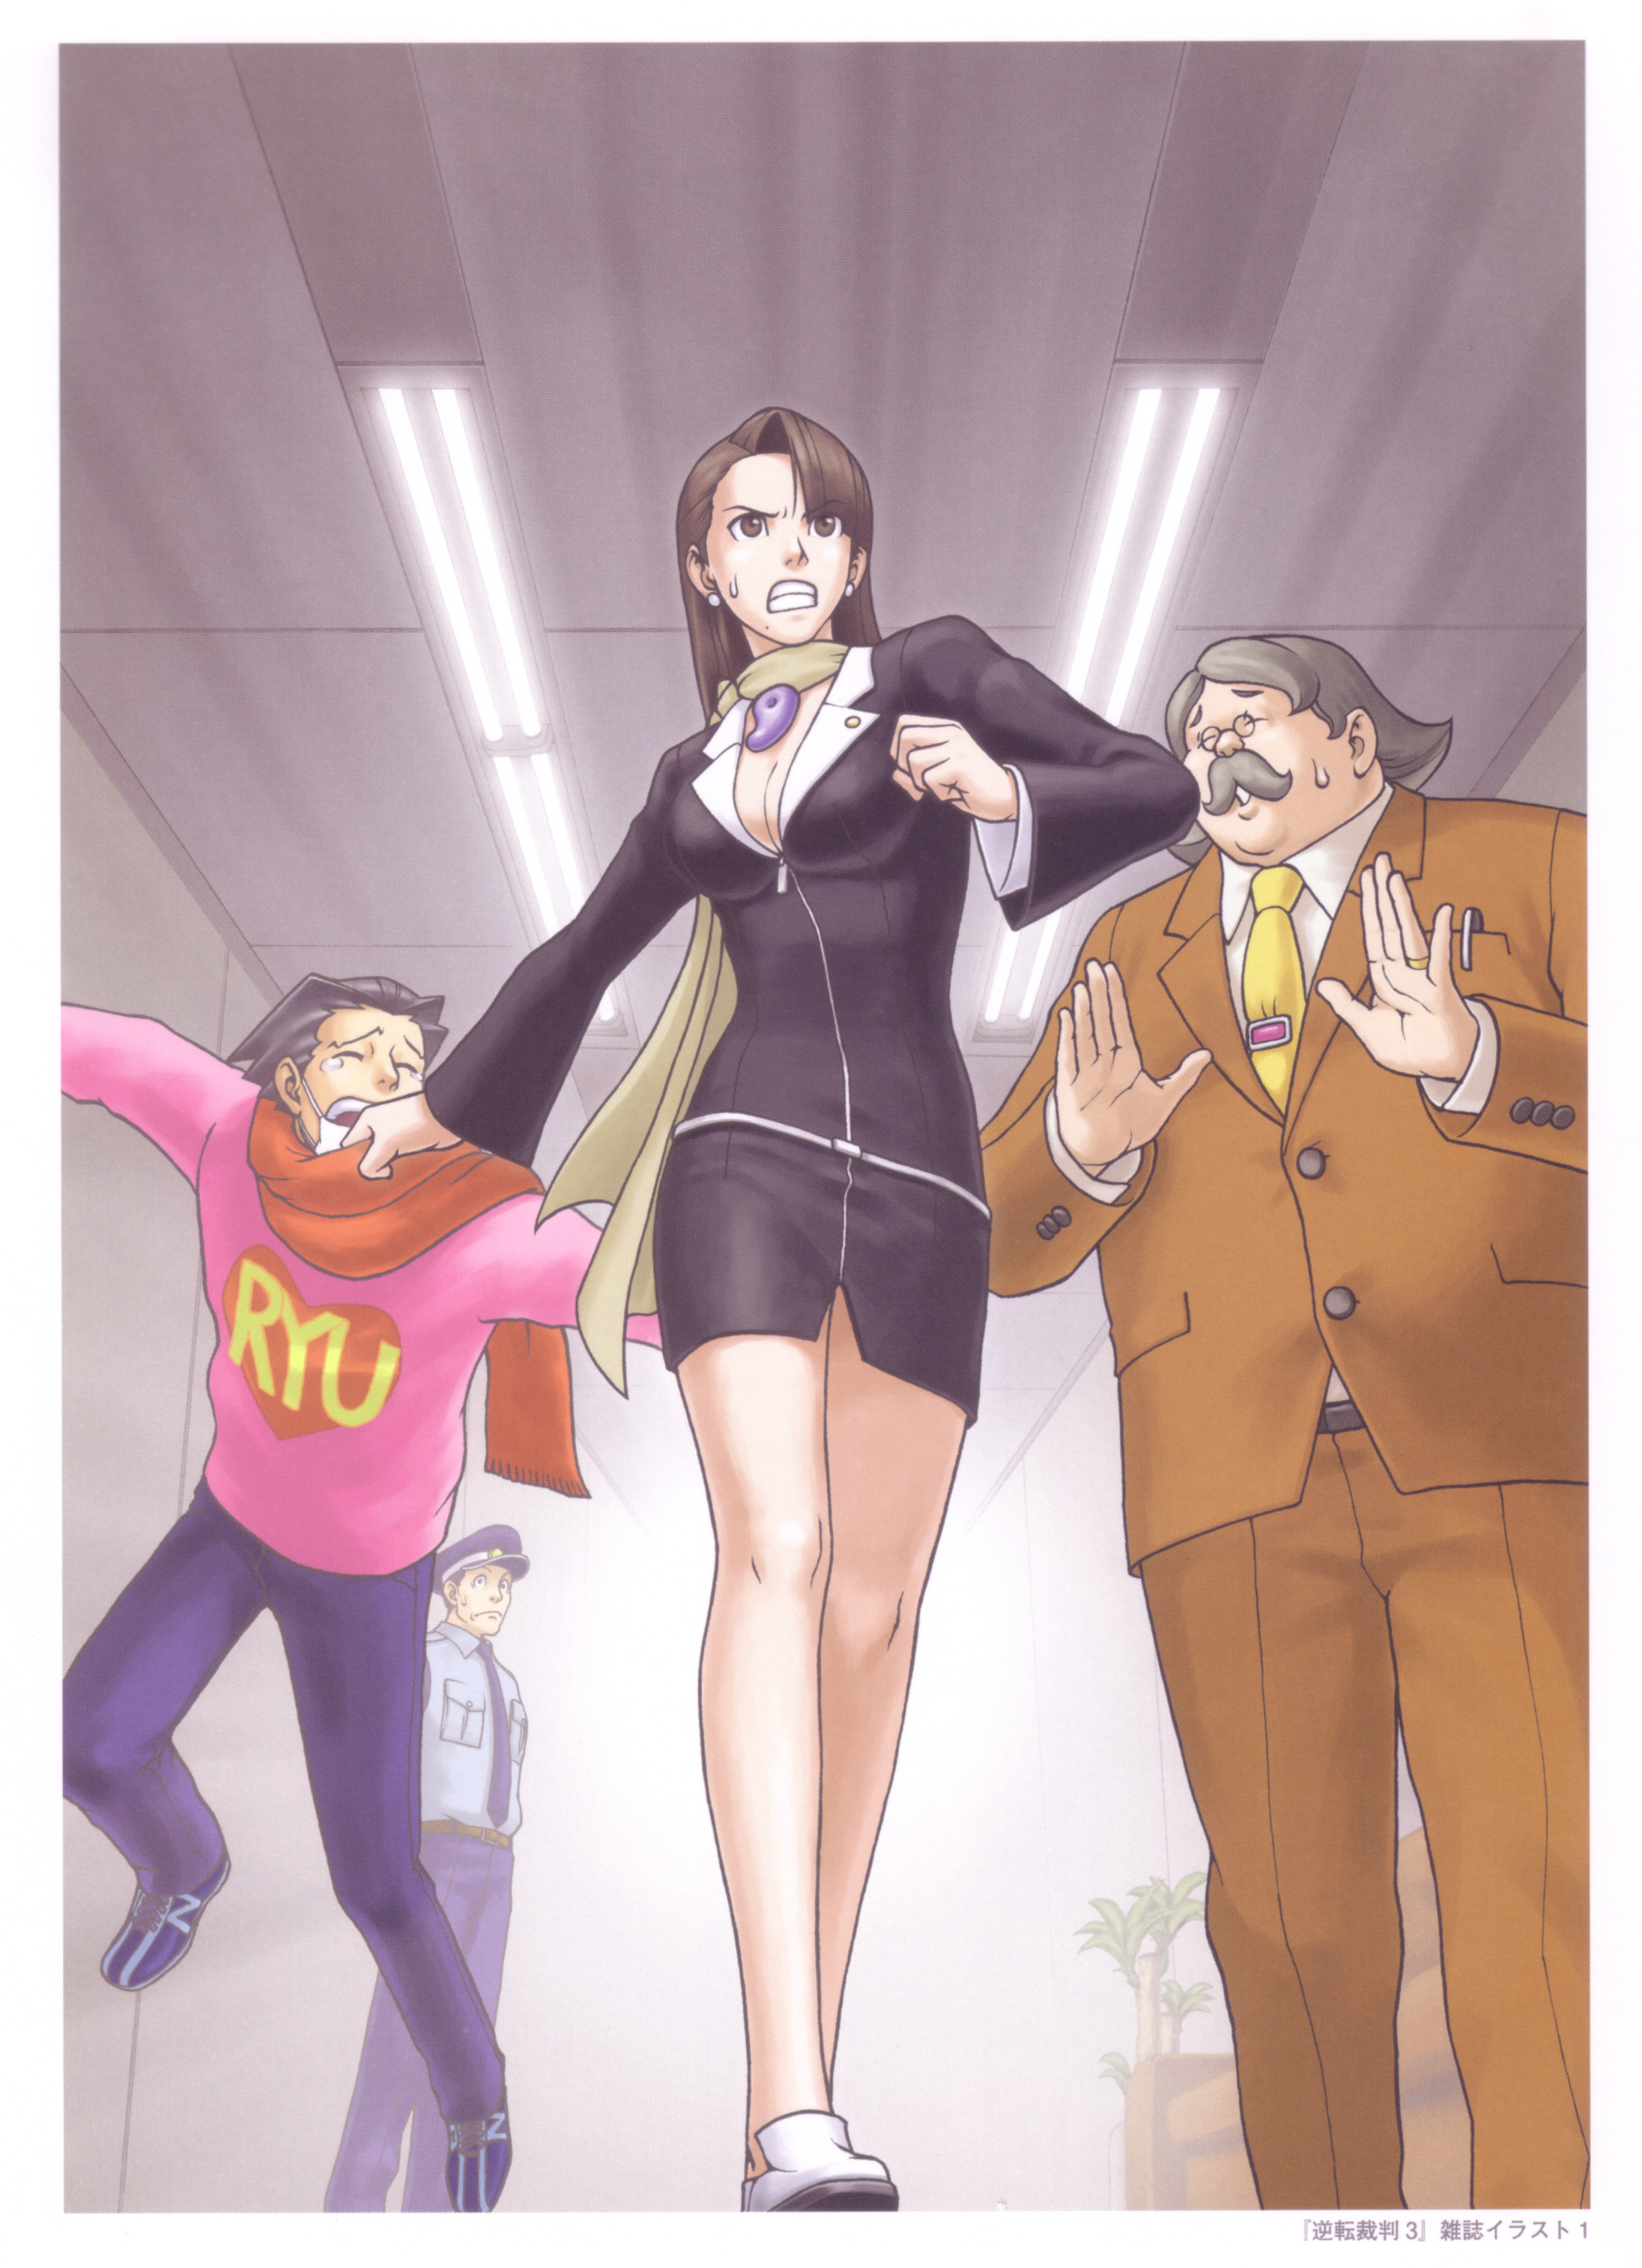 Phoenix Wright: Ace Attorney - Trials and Tribulations.